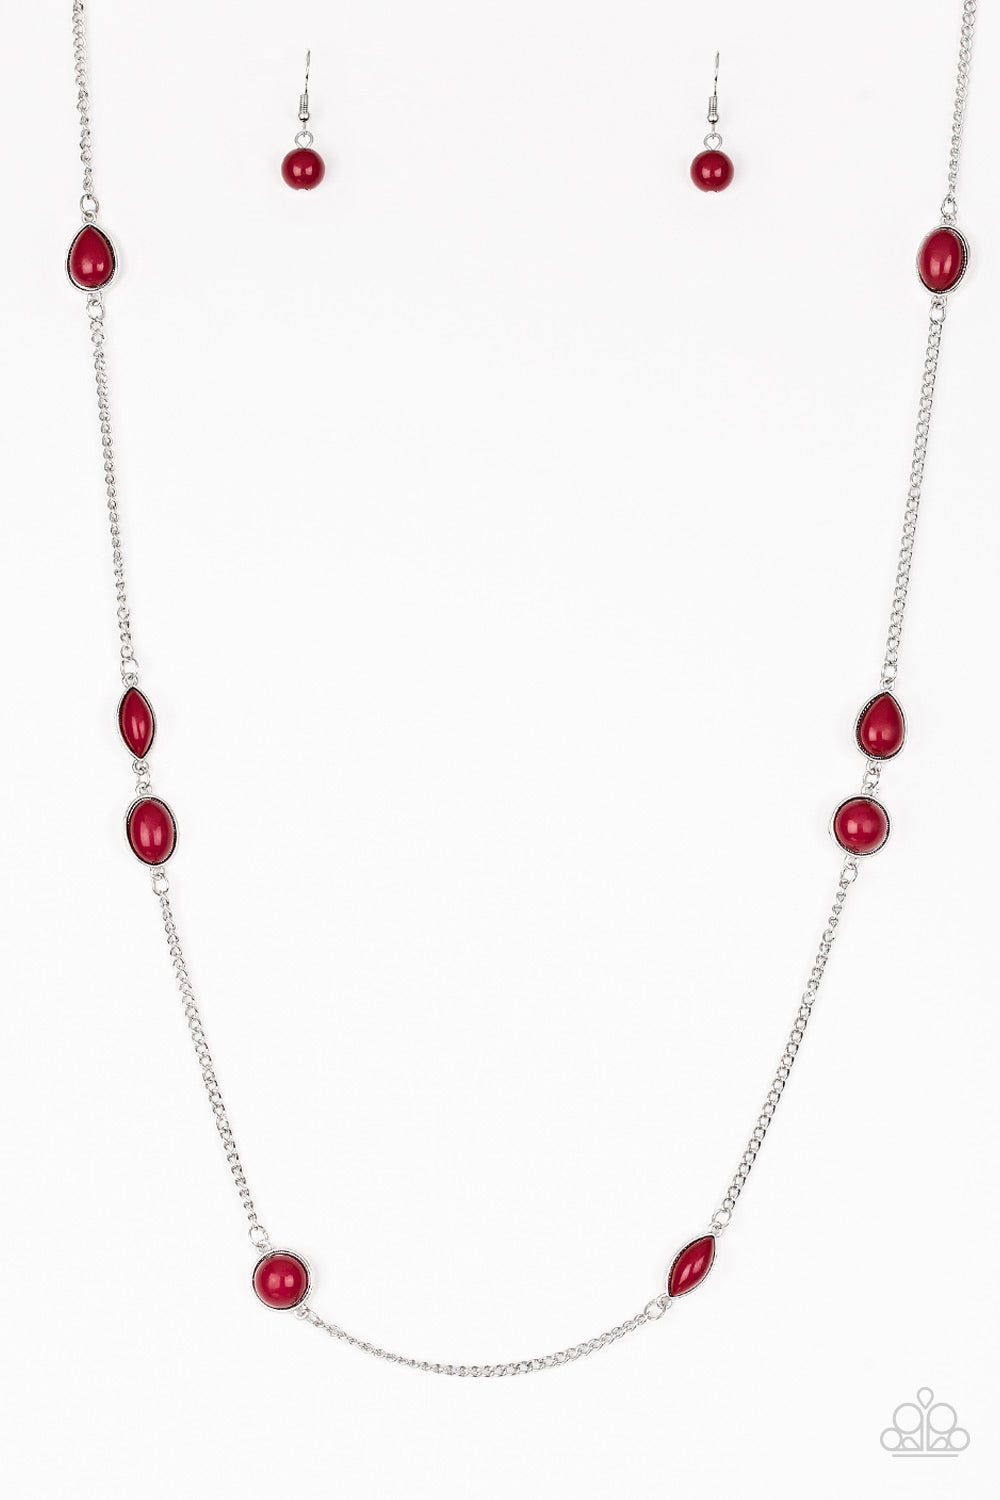 Pacific Piers - red - Paparazzi necklace